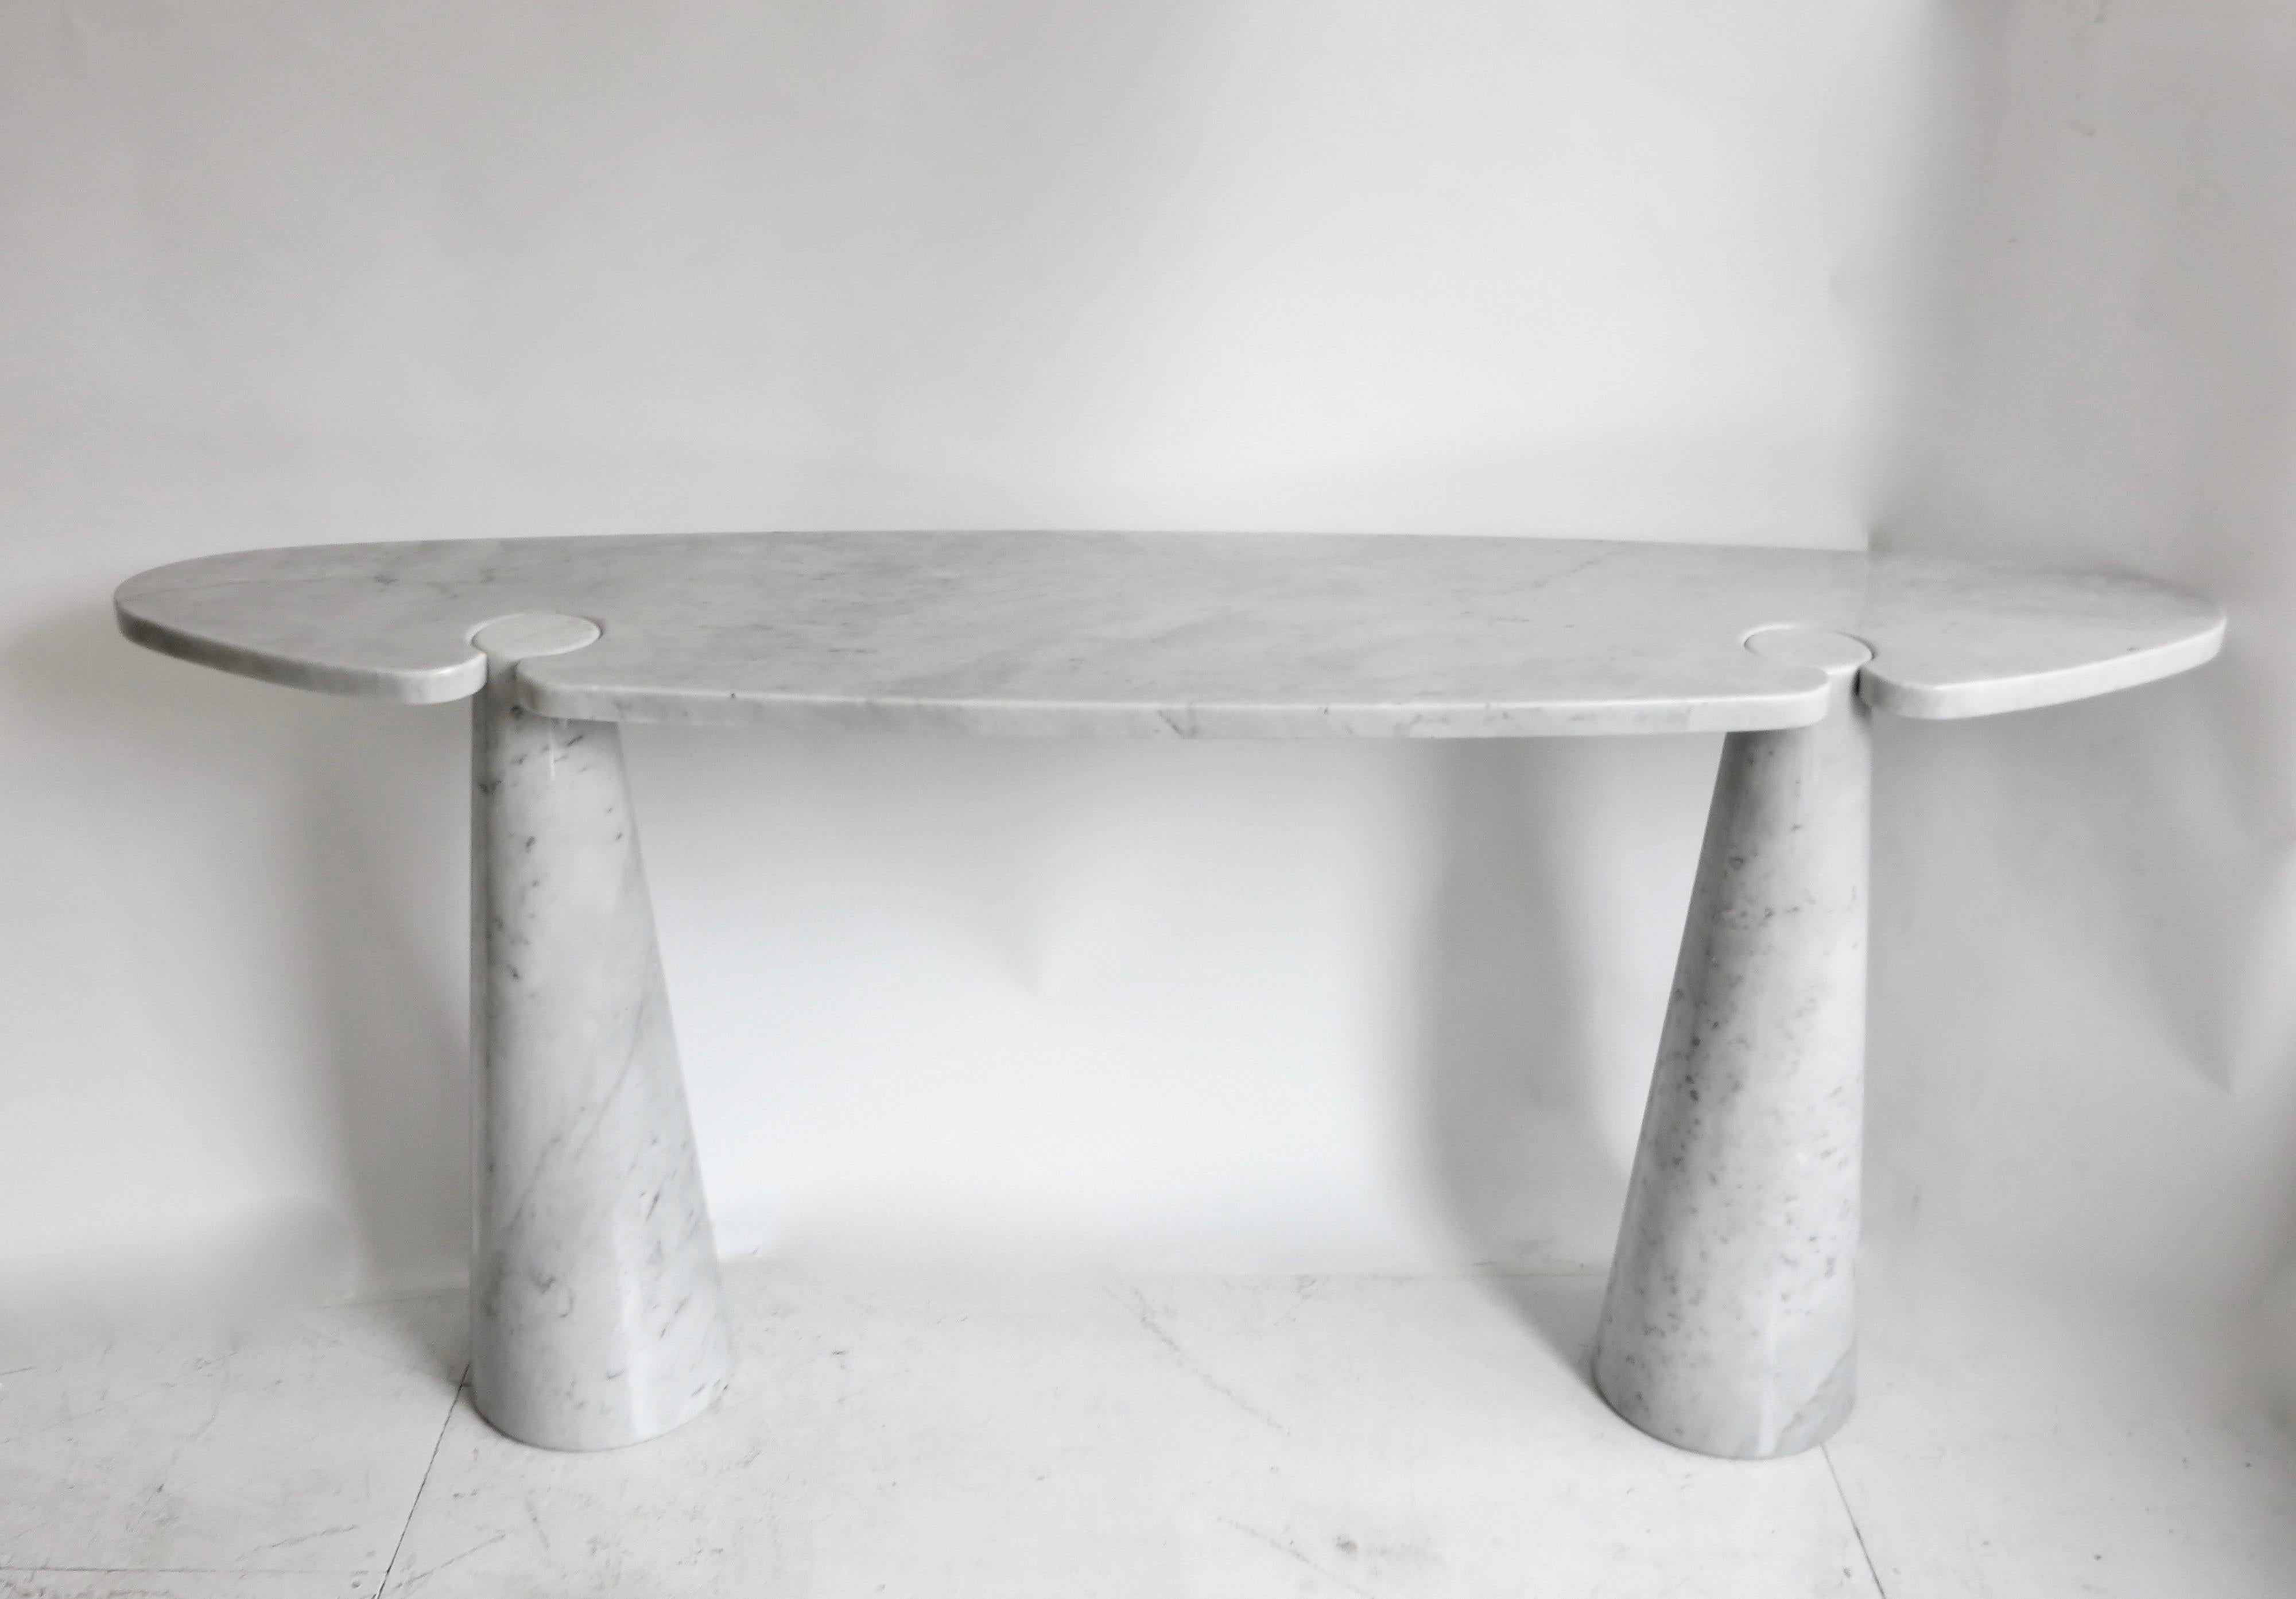 White Carrara marble console by Angelo Mangiarotti for Skipper Eros, circa 1971.
Designed by Angelo Mangiarotti for Skipper from the 'Eros' series, Carrara marble console with top fitted on two conical bases, Italy, 1971. Given Mangiarotti's